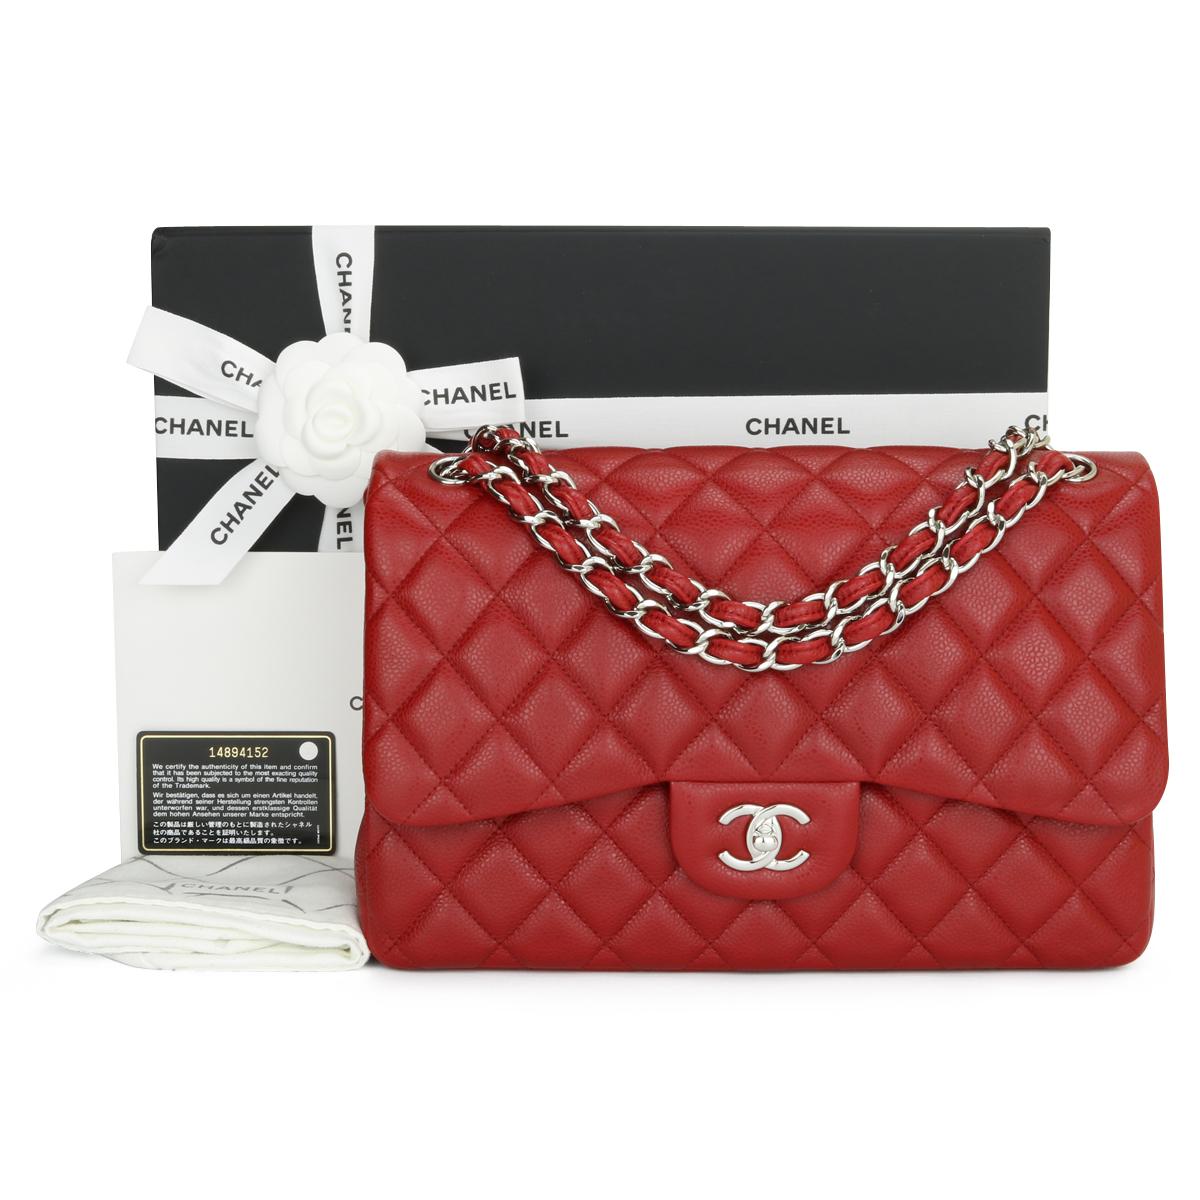 CHANEL Classic Double Flap Jumbo Bag Red Caviar with Silver Hardware 2011.

This stunning bag is in pristine condition, the bag still holds its shape well, and the hardware is still very shiny. The leather smells fresh as if new.

- Exterior